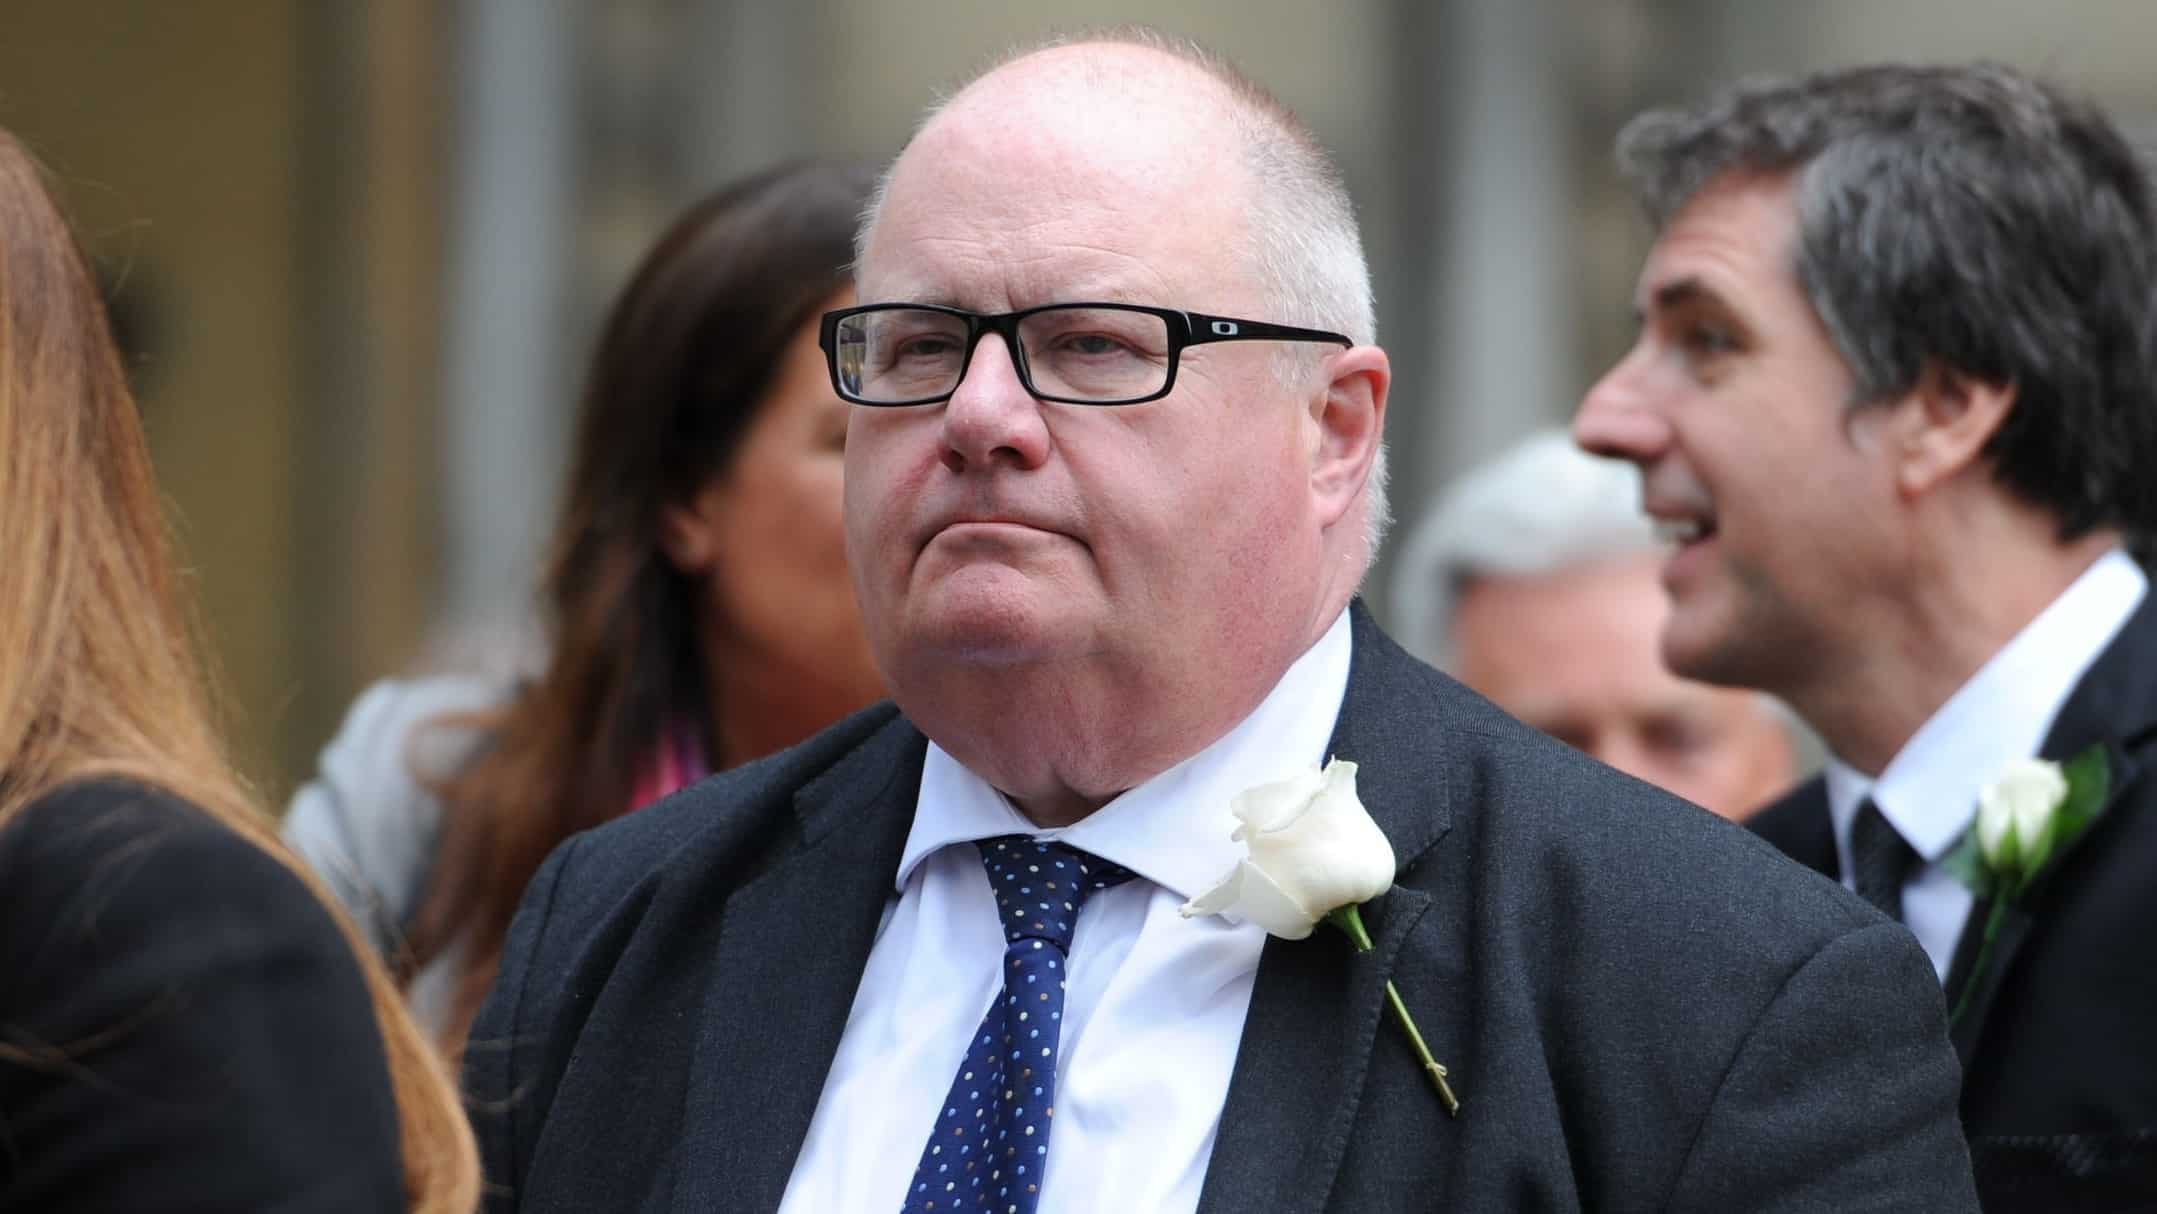 ‘Extremely busy’ Eric Pickles tells Grenfell Inquiry not to waste his time